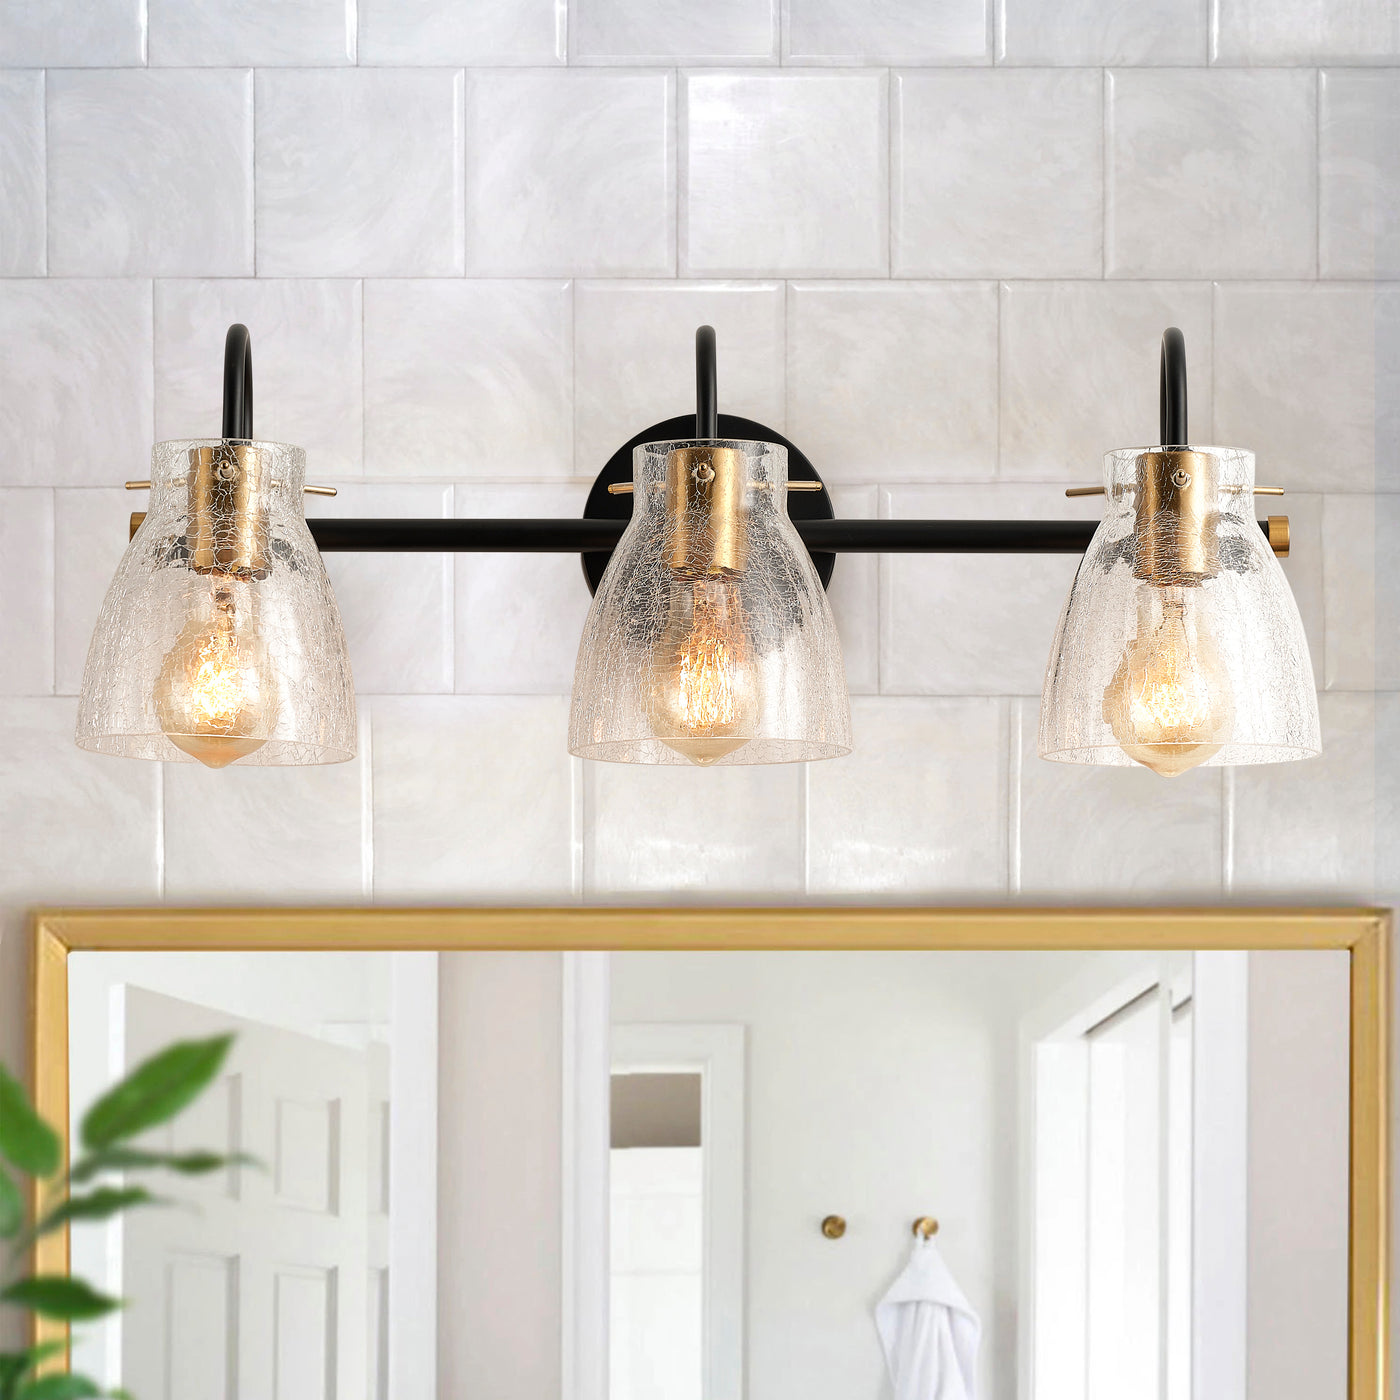 3-Lights Farmhouse with Shattered Textured Glass Shade Bathroom Vanity Lighting